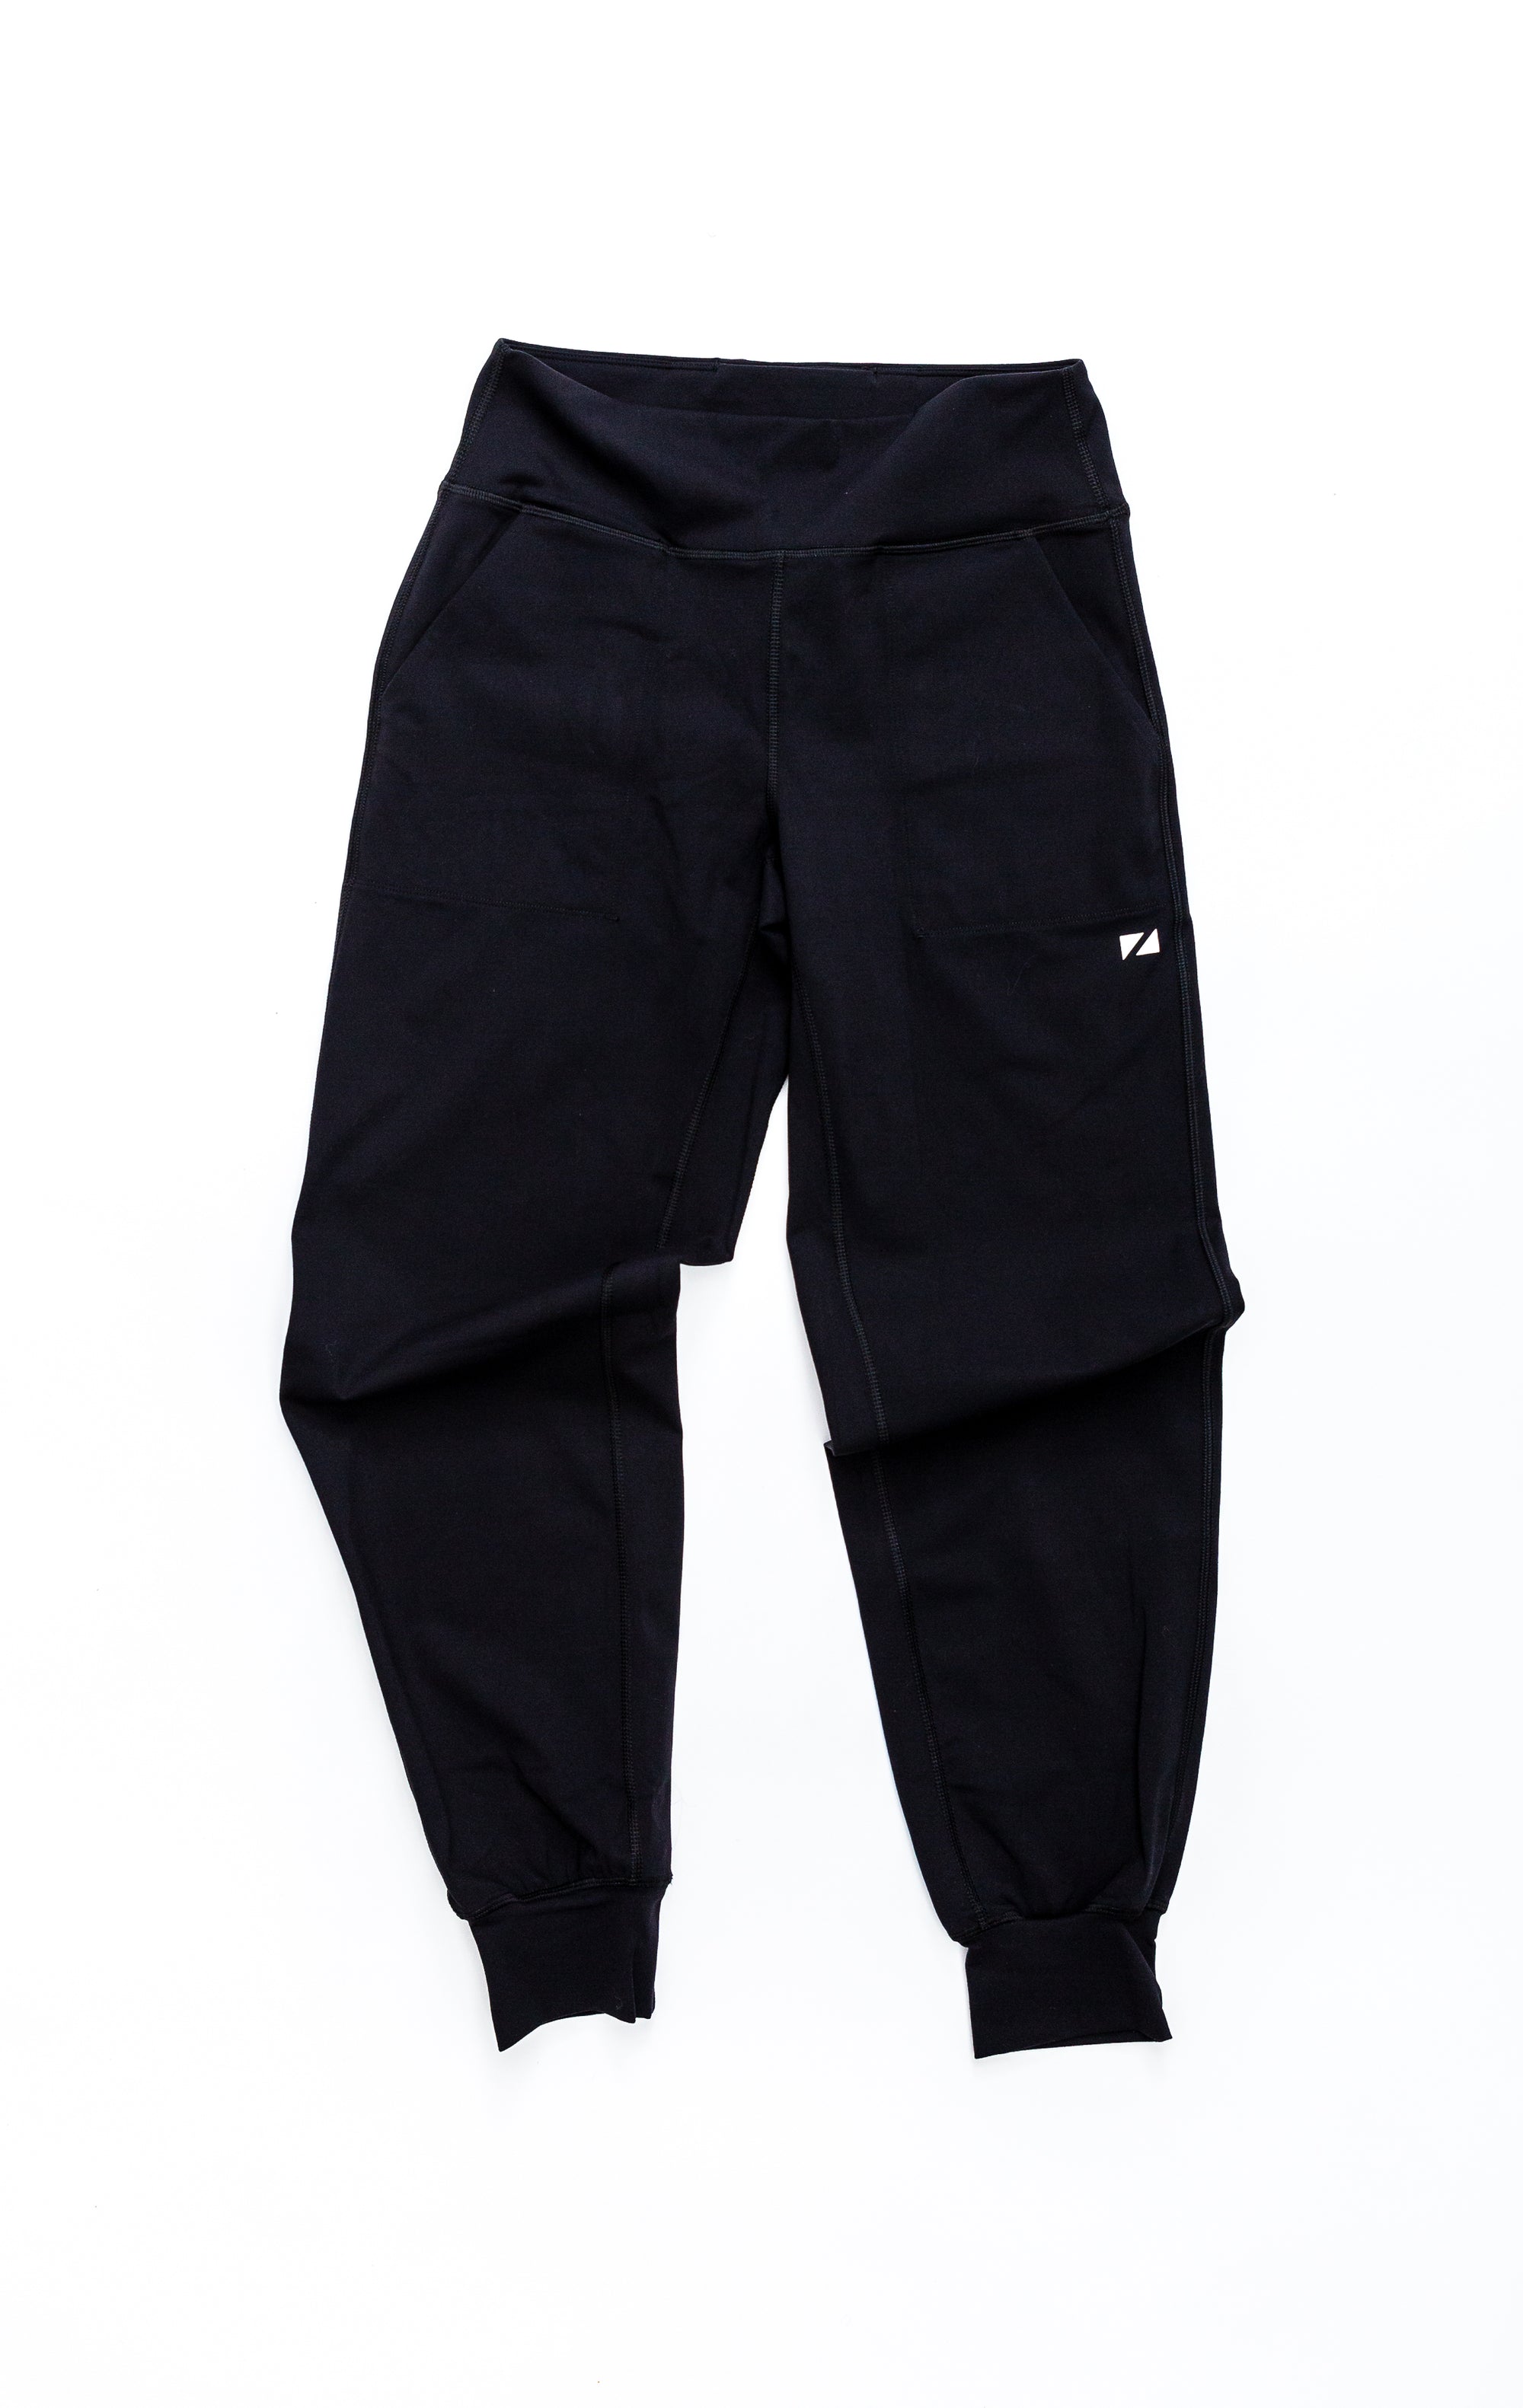 Ready to Fleece 28” Joggers in Black (6). Review in comments! : r